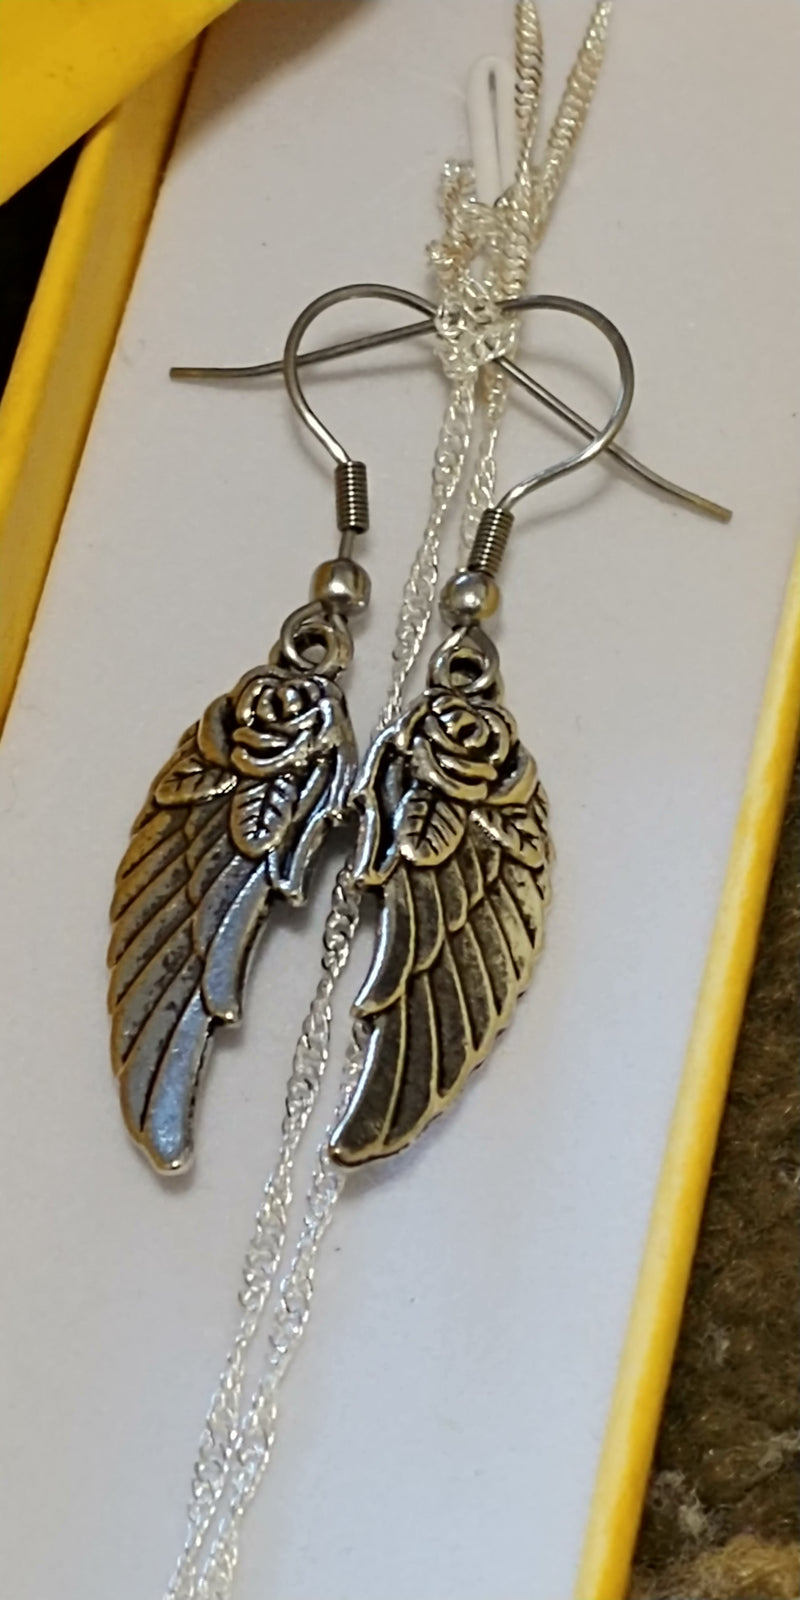 Six Shooter Heritage Rose Wing Necklace Vintage Silver + FREE Matching Earrings